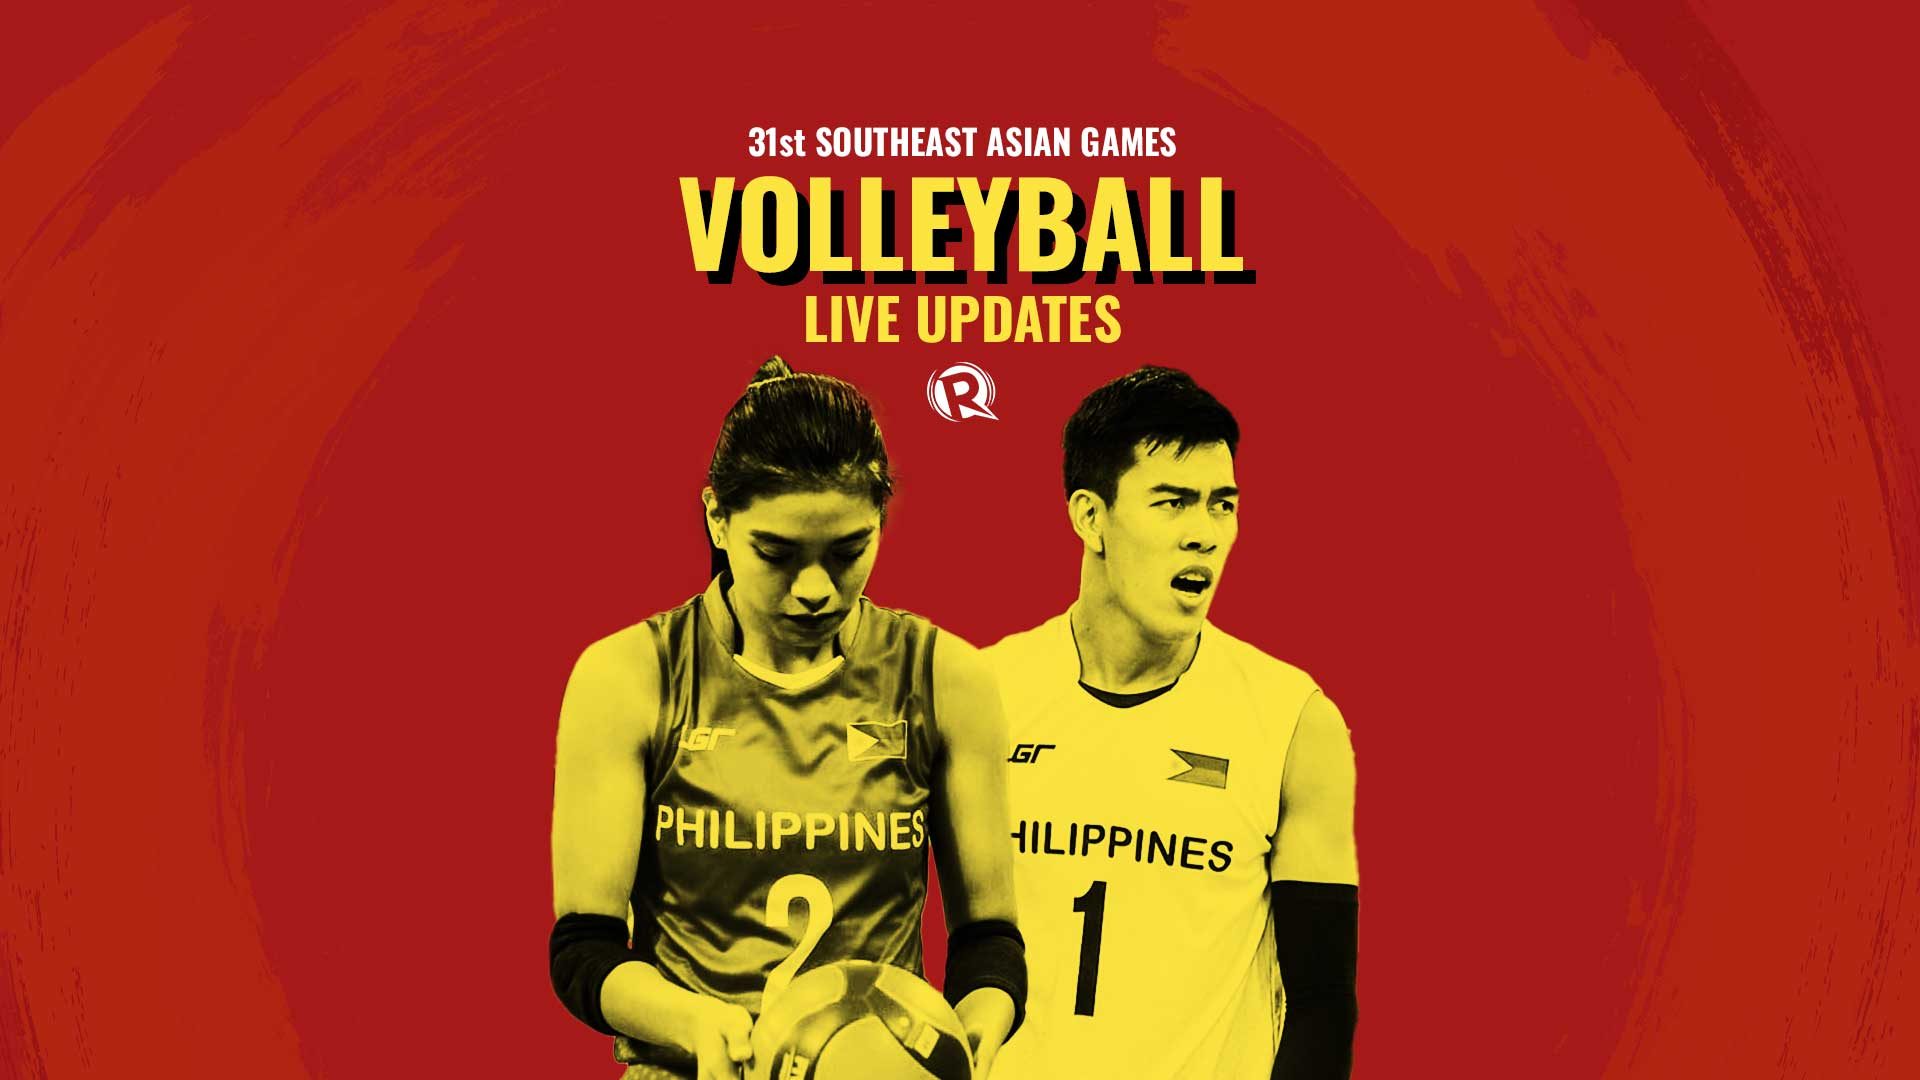 HIGHLIGHTS: Team Philippines men’s and women’s volleyball – 31st SEA Games